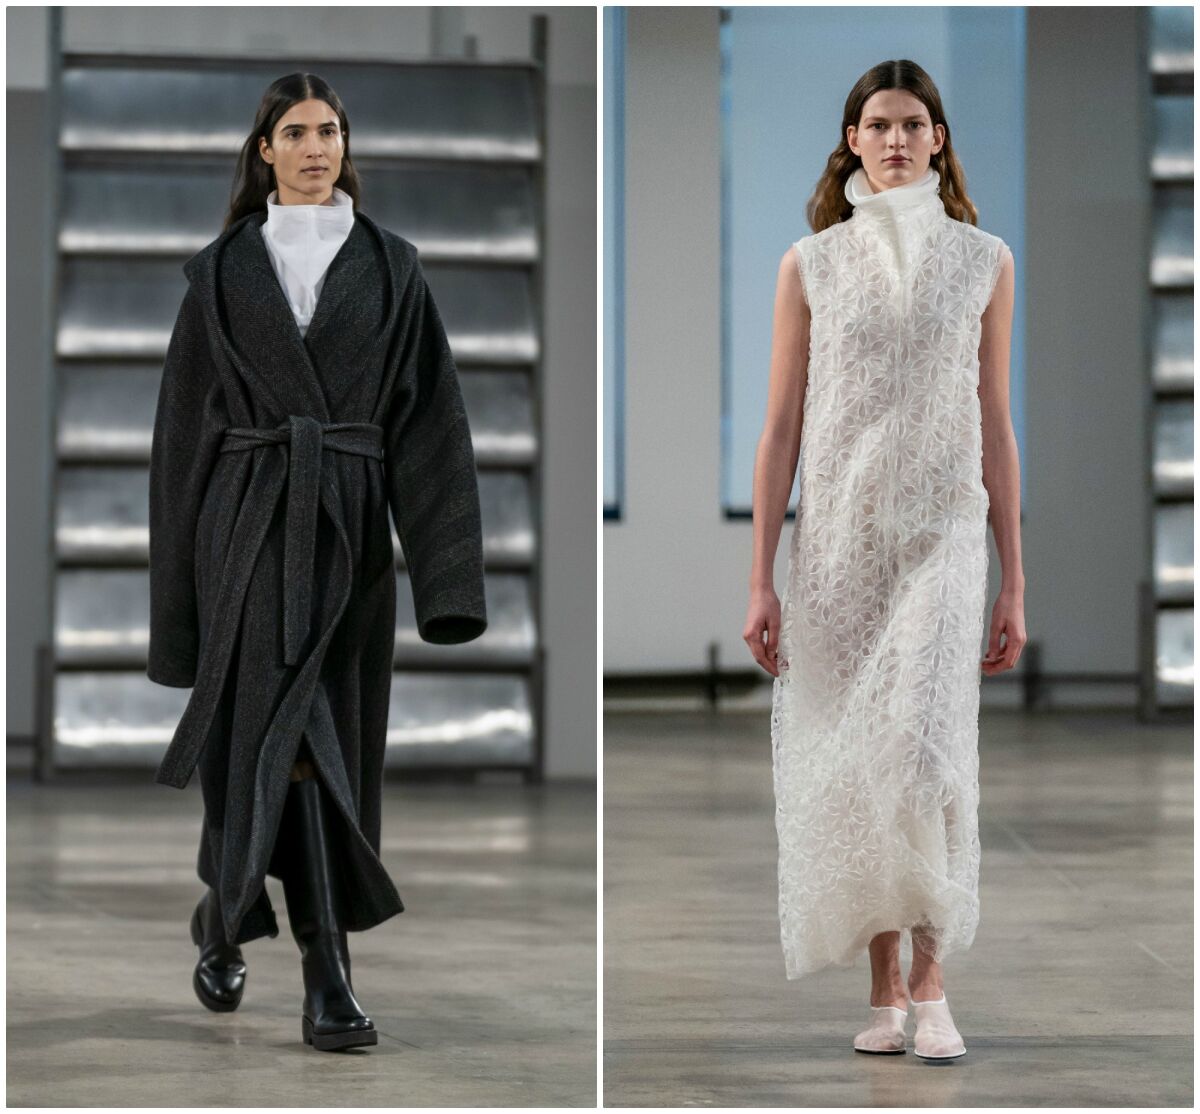 Two fall looks from the Row, the fashion label designed by Ashley and Mary-Kate Olsen